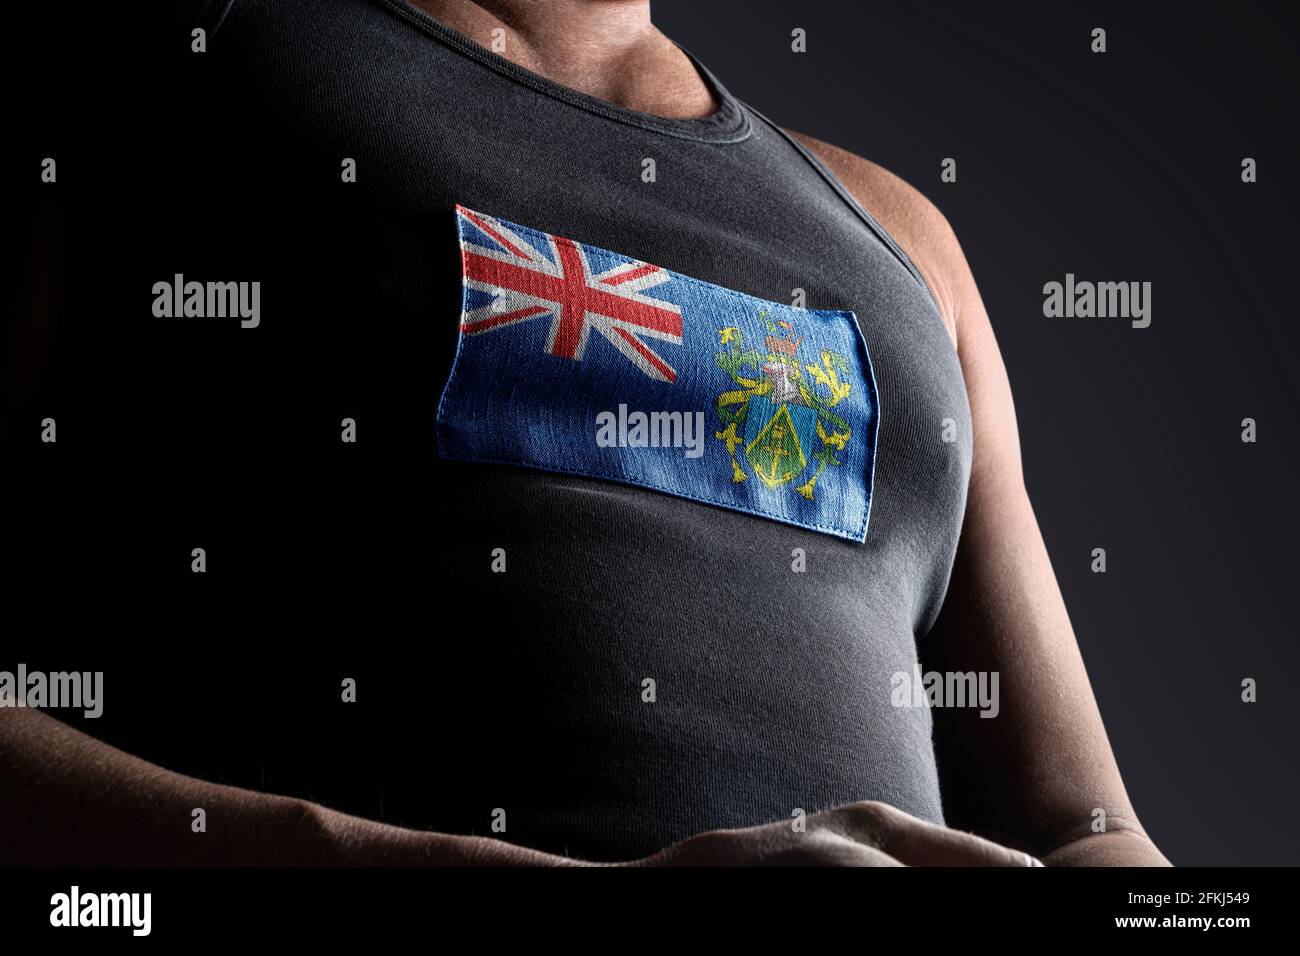 The national flag of Pitcairn Islands on the athlete's chest Stock Photo